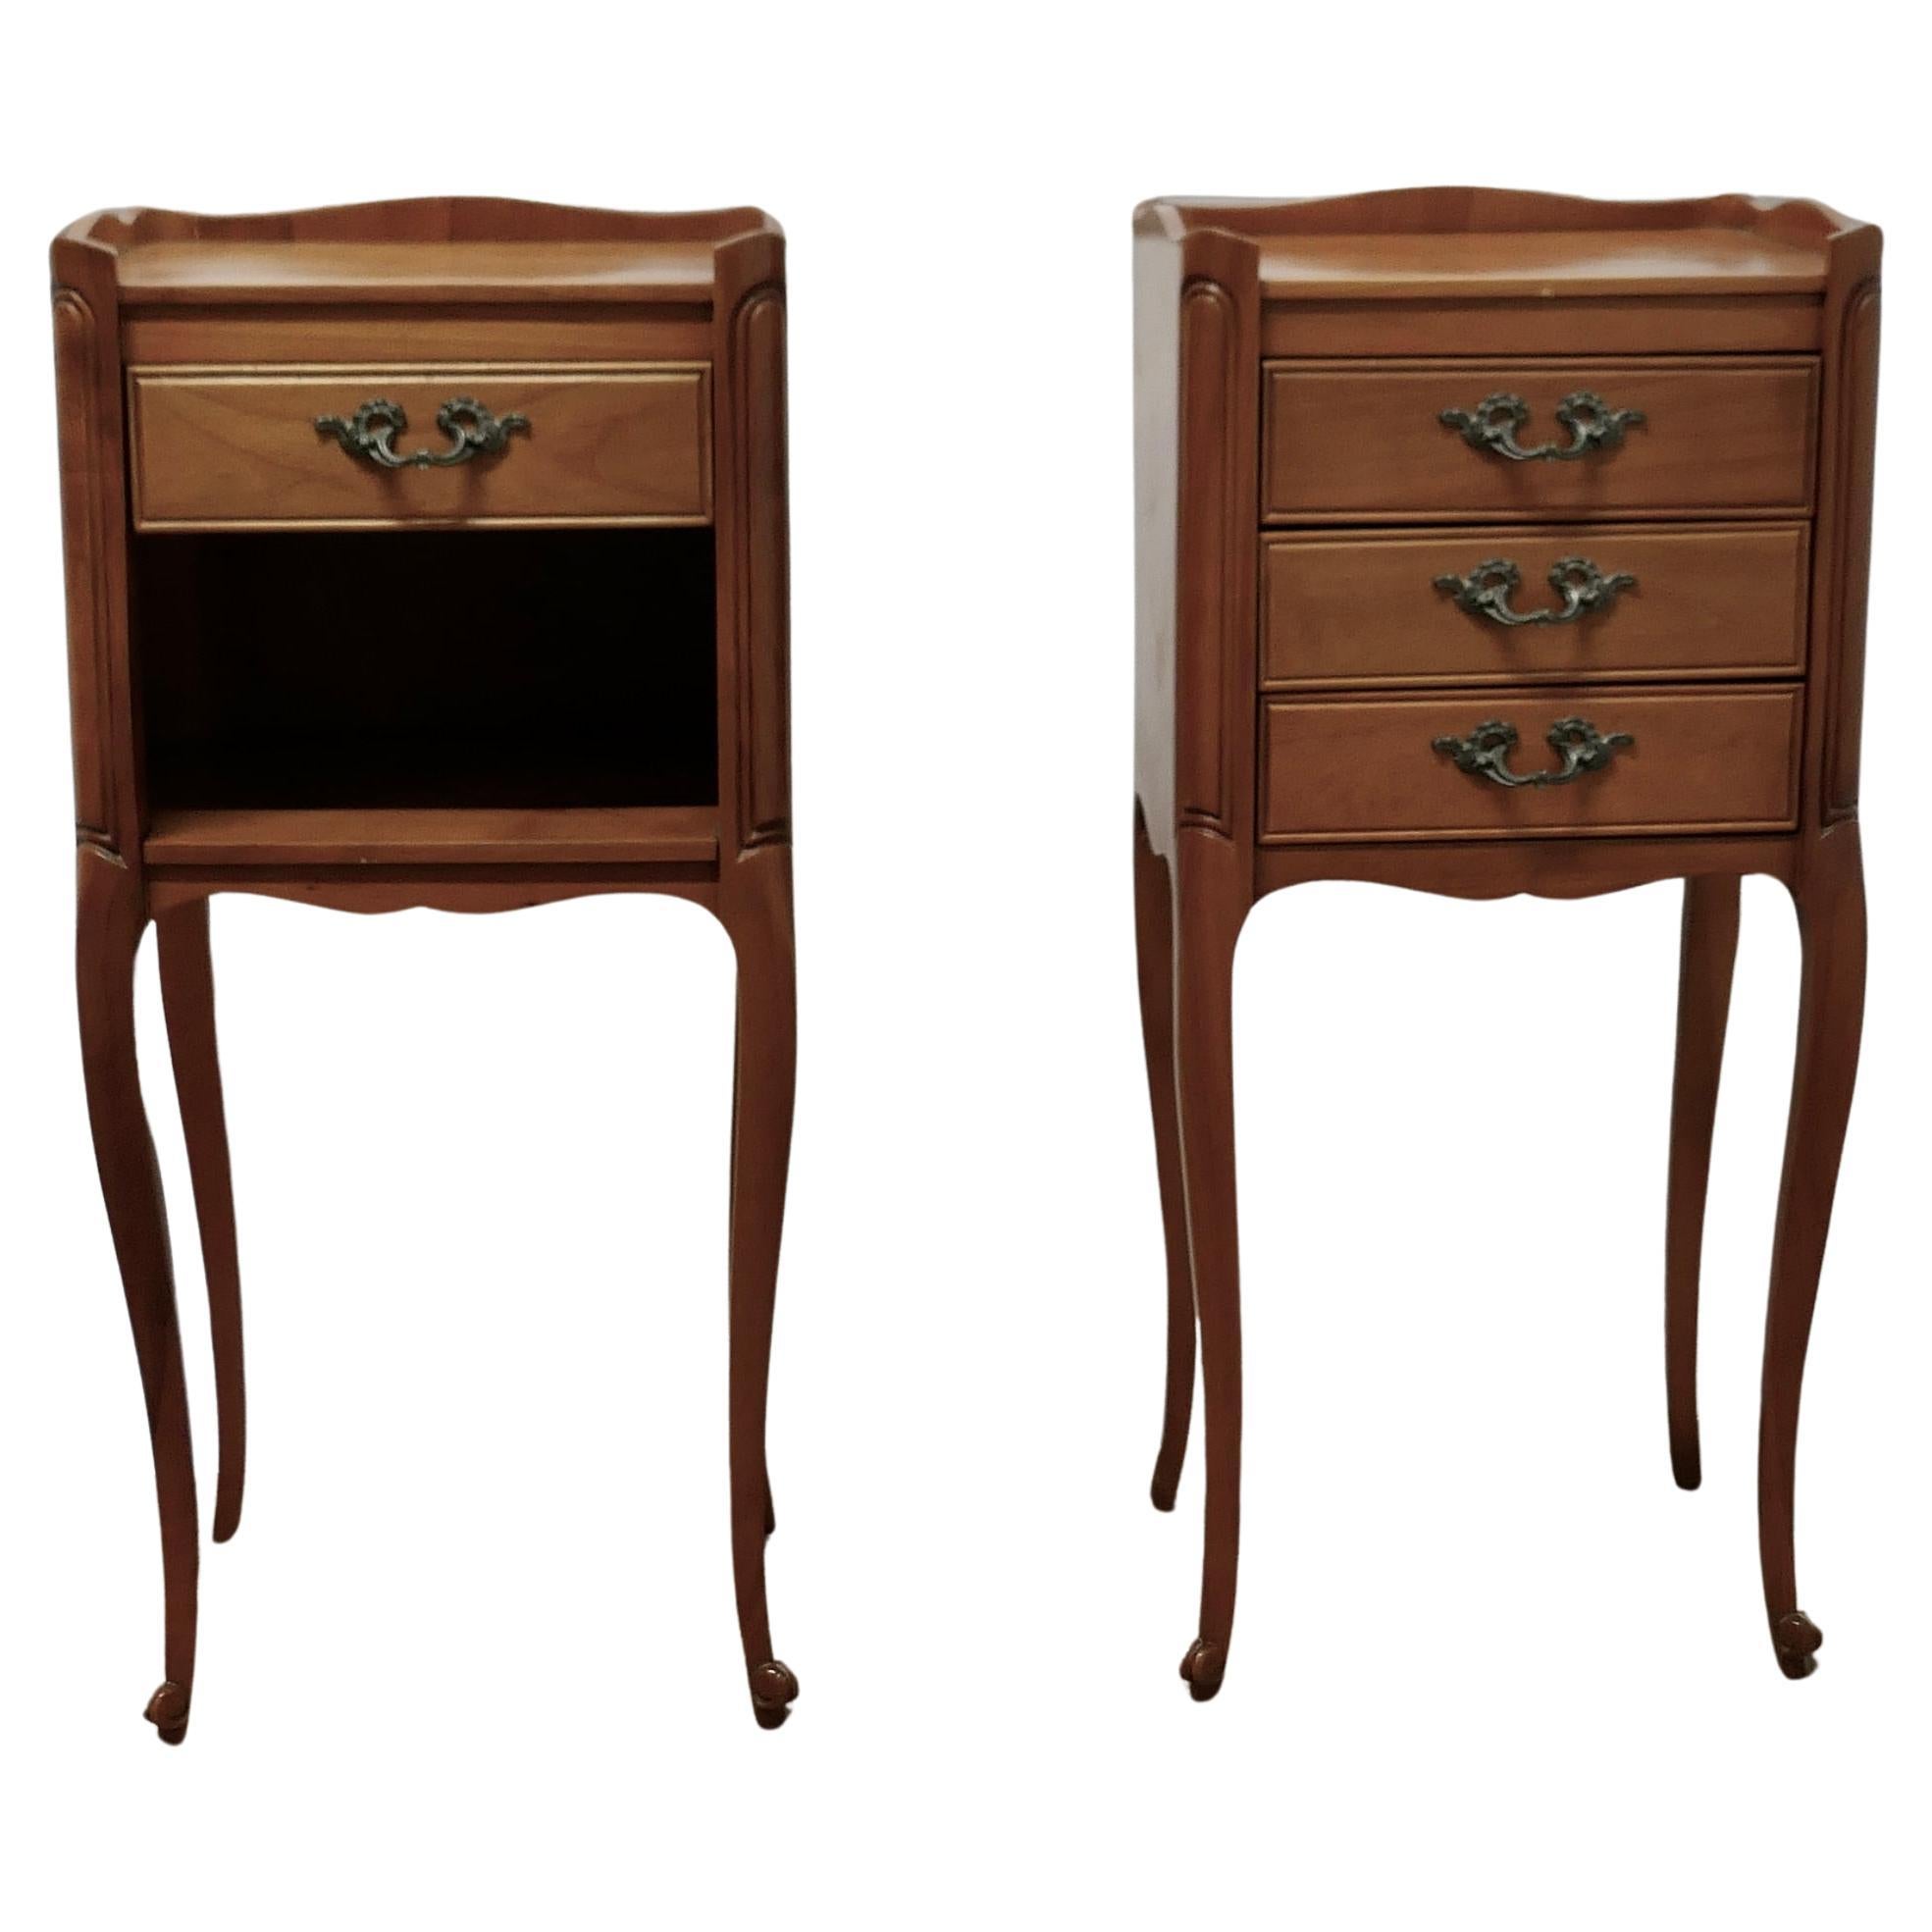 Pair of Petite French Cherry Wood Bedside Cabinets or Tables    For Sale